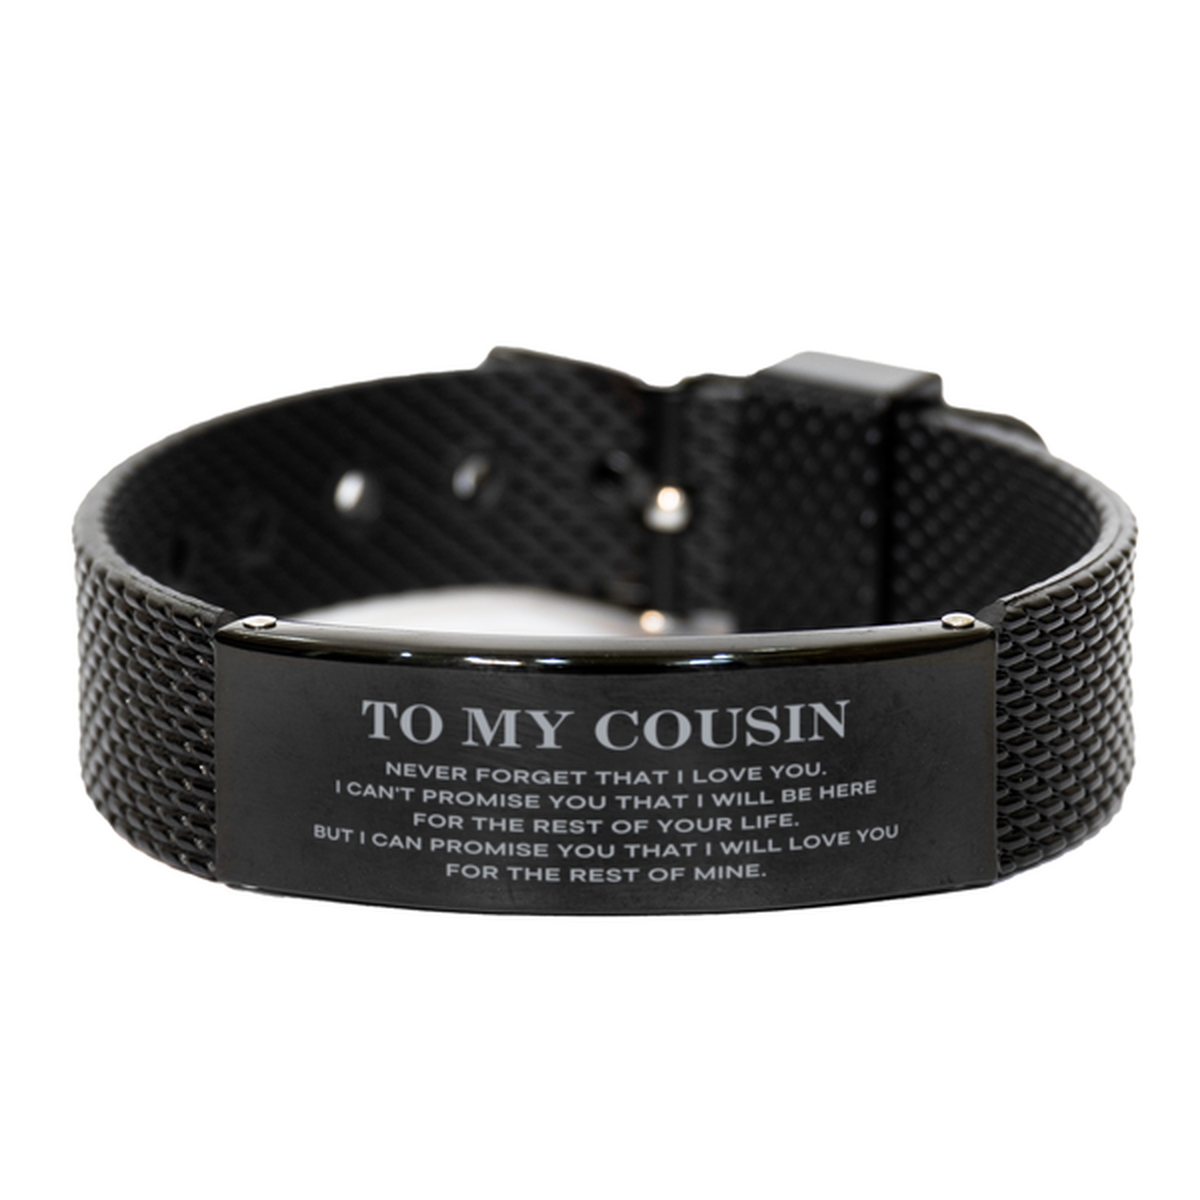 To My Cousin Gifts, I will love you for the rest of mine, Love Cousin Bracelet, Birthday Christmas Unique Black Shark Mesh Bracelet For Cousin